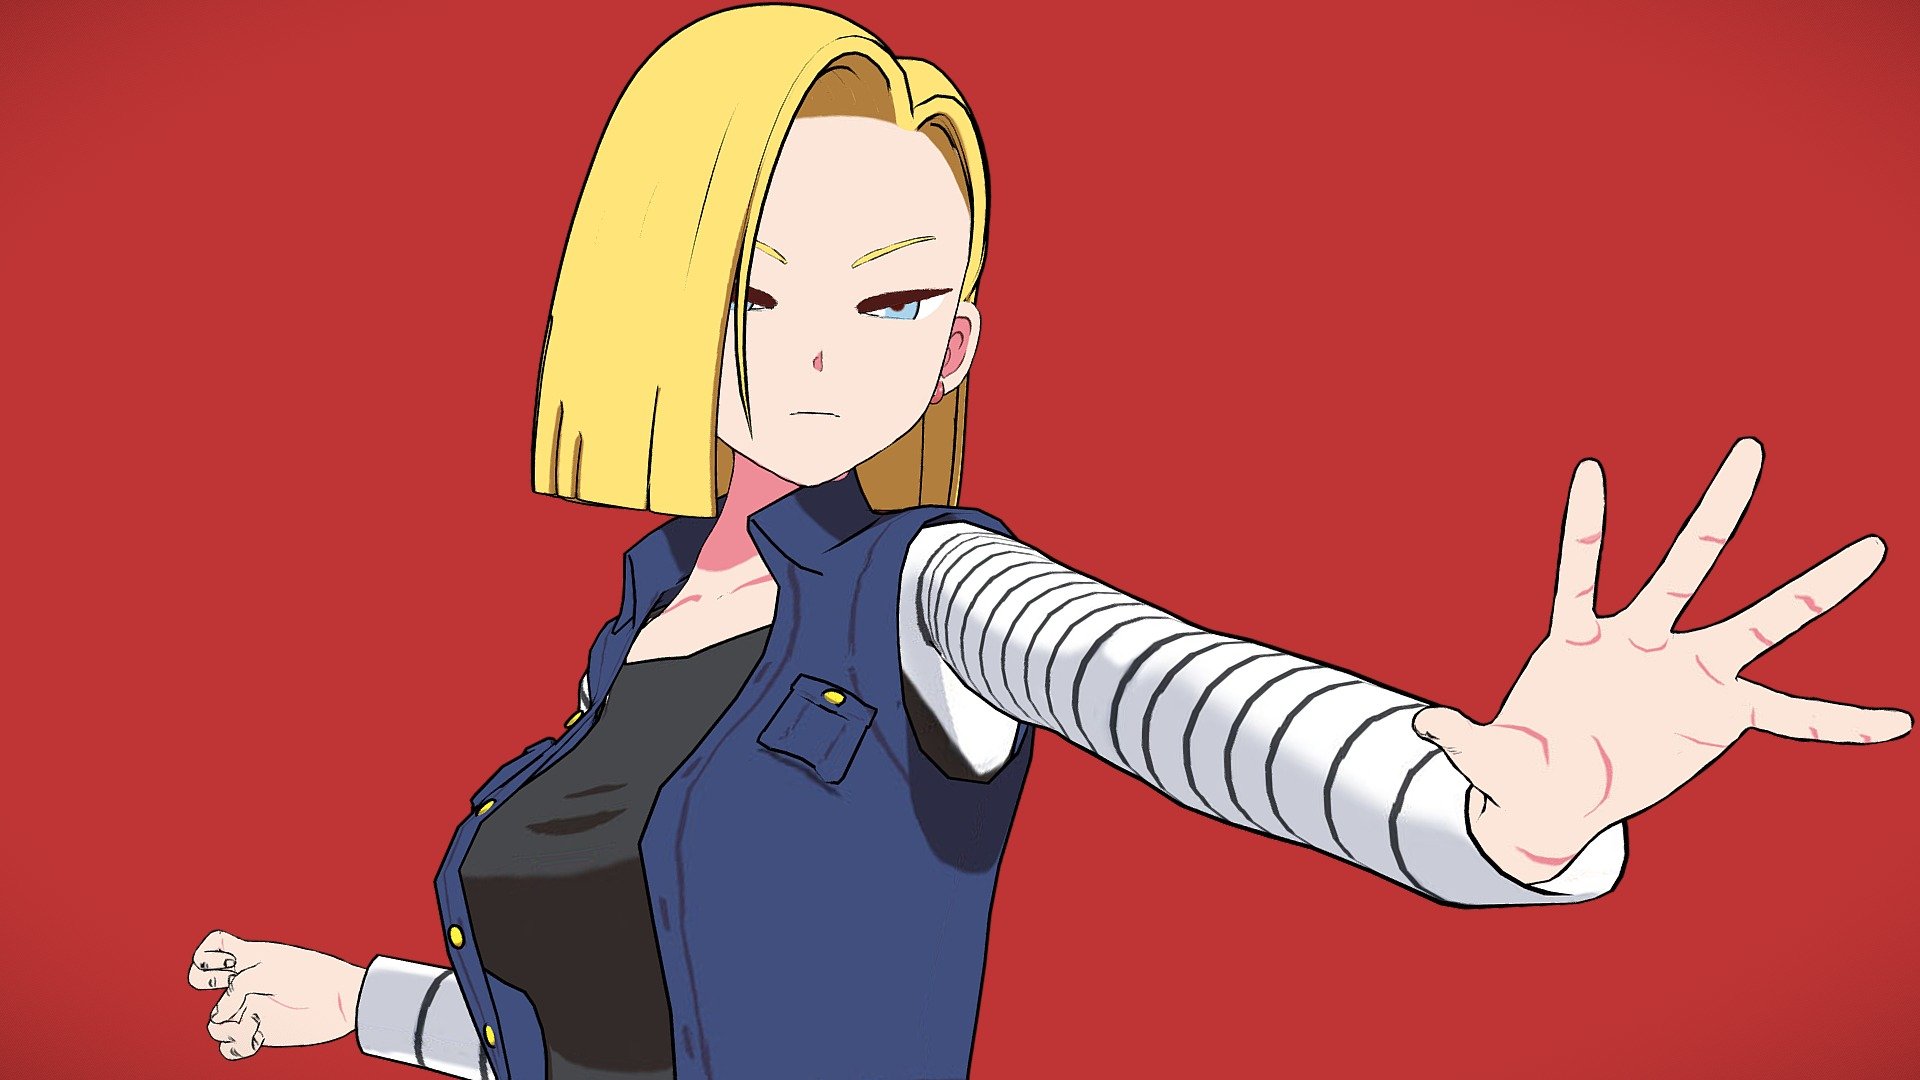 Android 18 (人造人間１８号 Jinzōningen Jū Hachi-Gō), originally named Lazuli (ラズリ Razuri)[4] when she was an ordinary human, is the older twin sister of Android 17 and Dr. Gero's eighteenth android creation, designed to serve Gero's vendetta against Goku. While her interests do not initially deviate from this expectation, her curiosity to activate Android 16, in spite of Gero's orders not to do so, leads Android 17 to take it upon himself to murder Gero. Eventually, Android 18 becomes a member of the Z Fighters, as well as the wife of Krillin and the mother of their daughter Marron.

Blender 3.3

VIDEO IN BLENDER

Files:


Textures
.Blend
Rigged

GIF:

 - Android 18 - Buy Royalty Free 3D model by LessaB3D (@thiagolessa90) 3d model